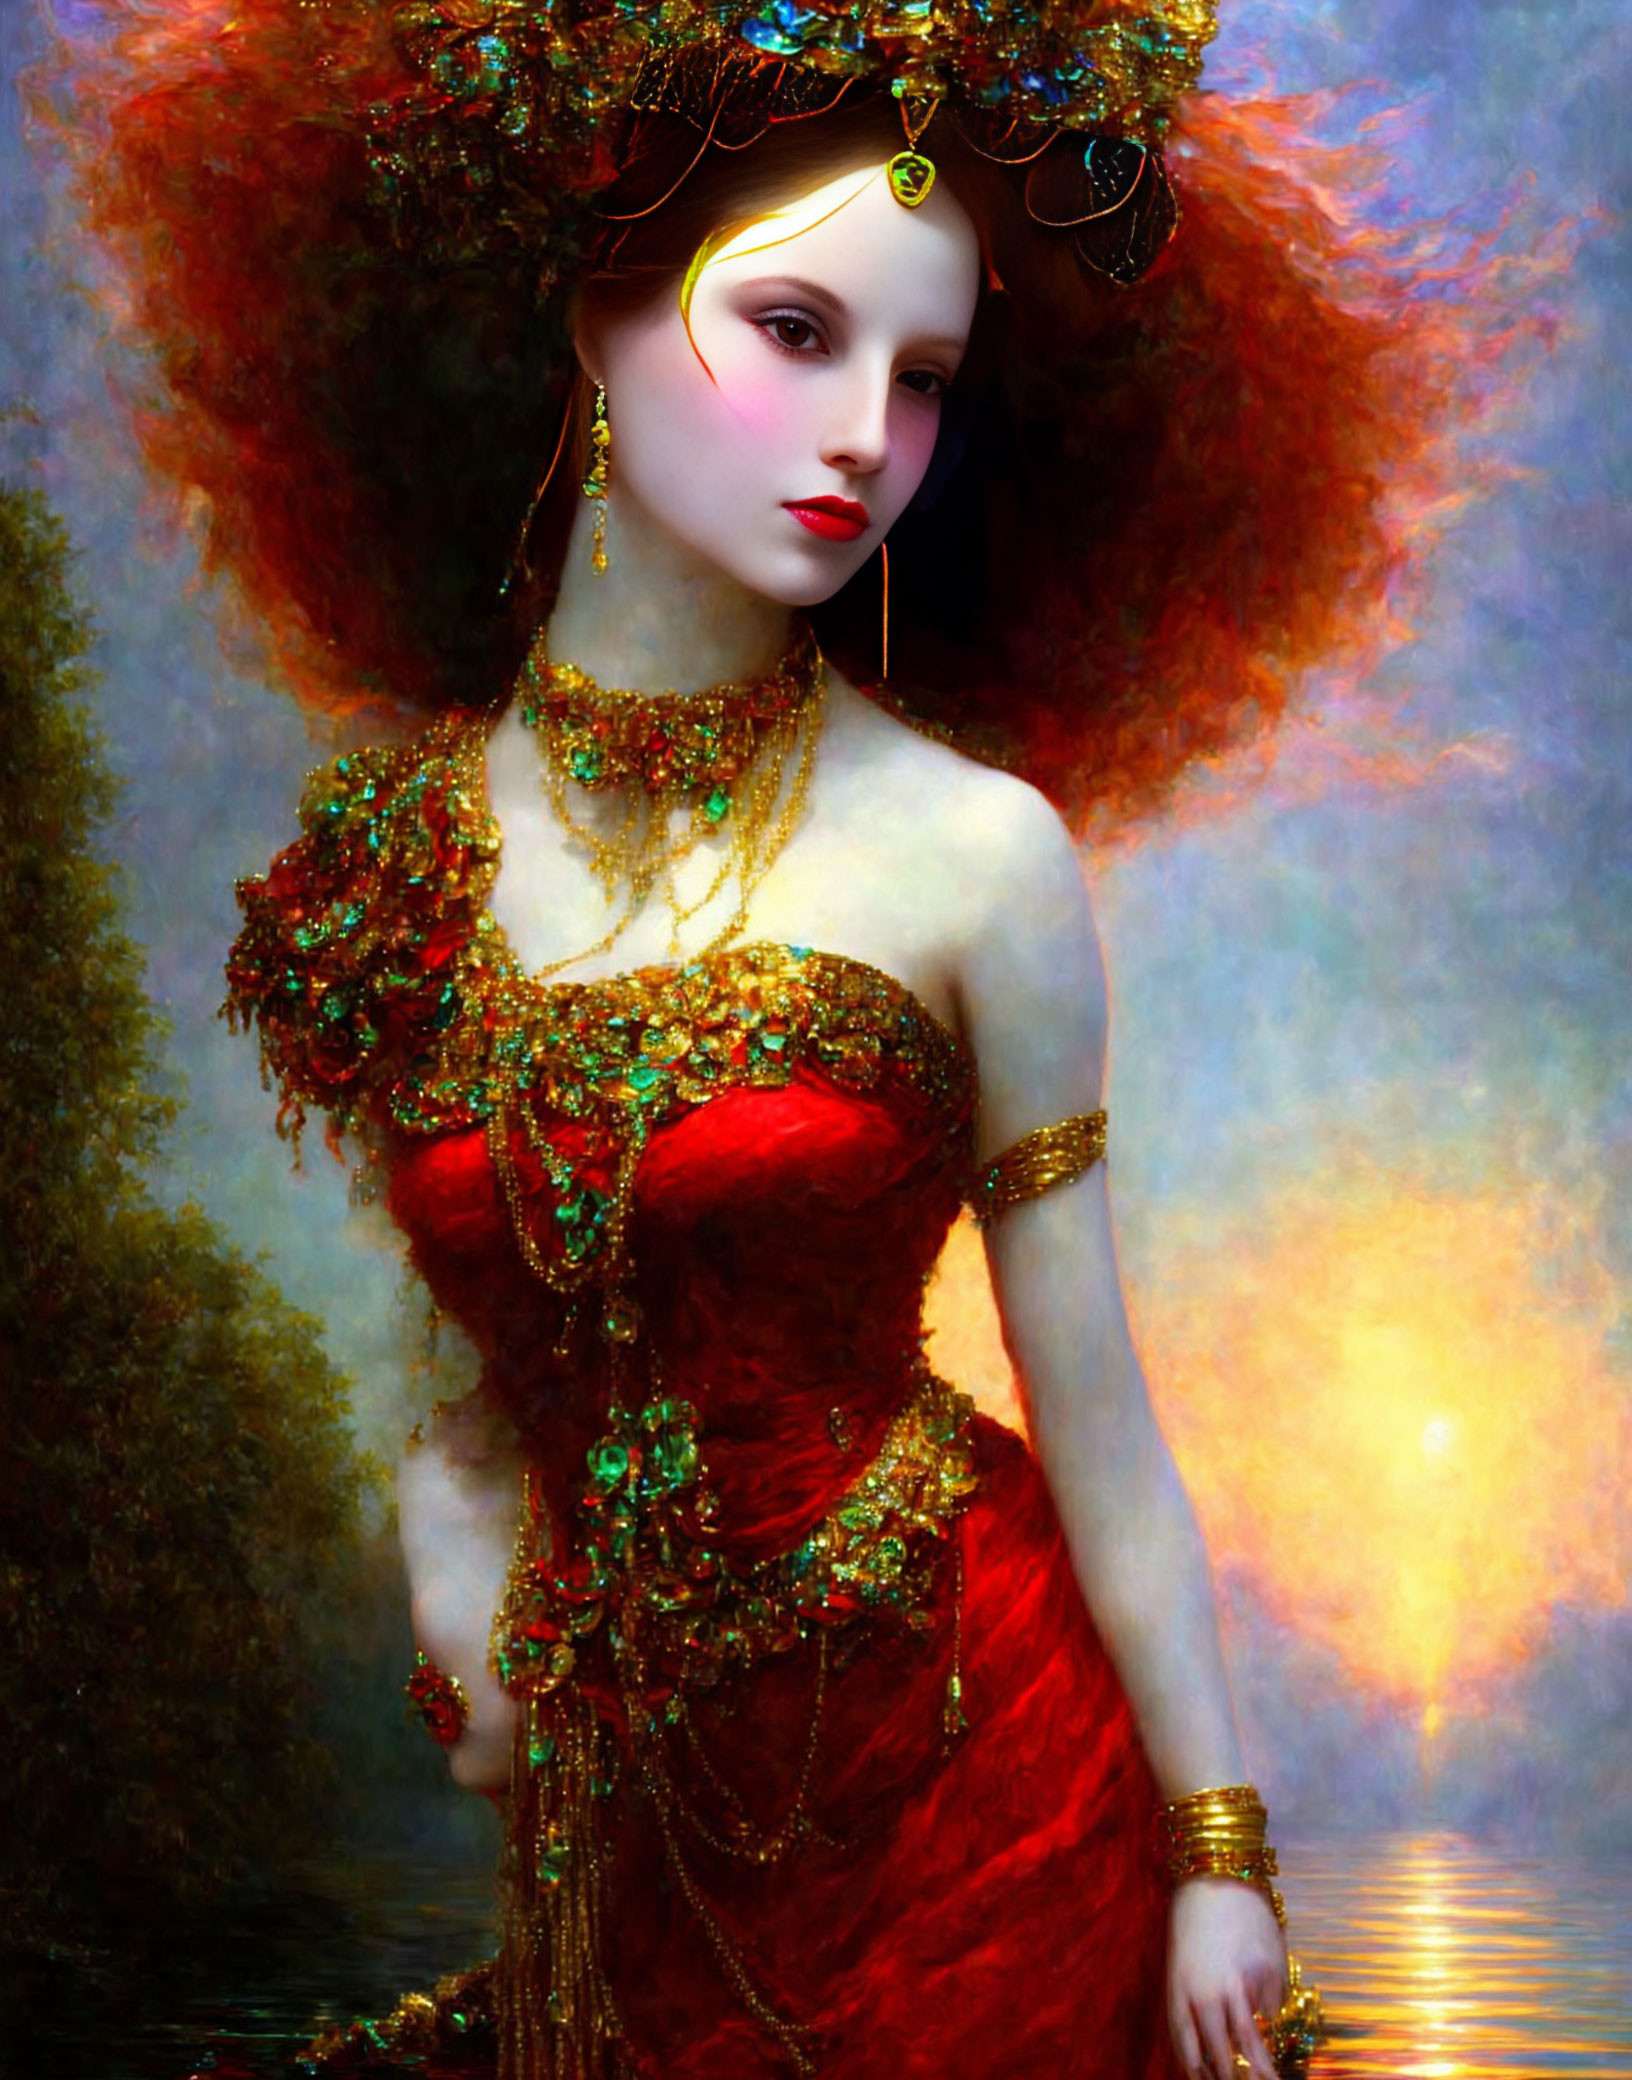 Luxurious Red and Gold Gown on Woman in Mystical Setting